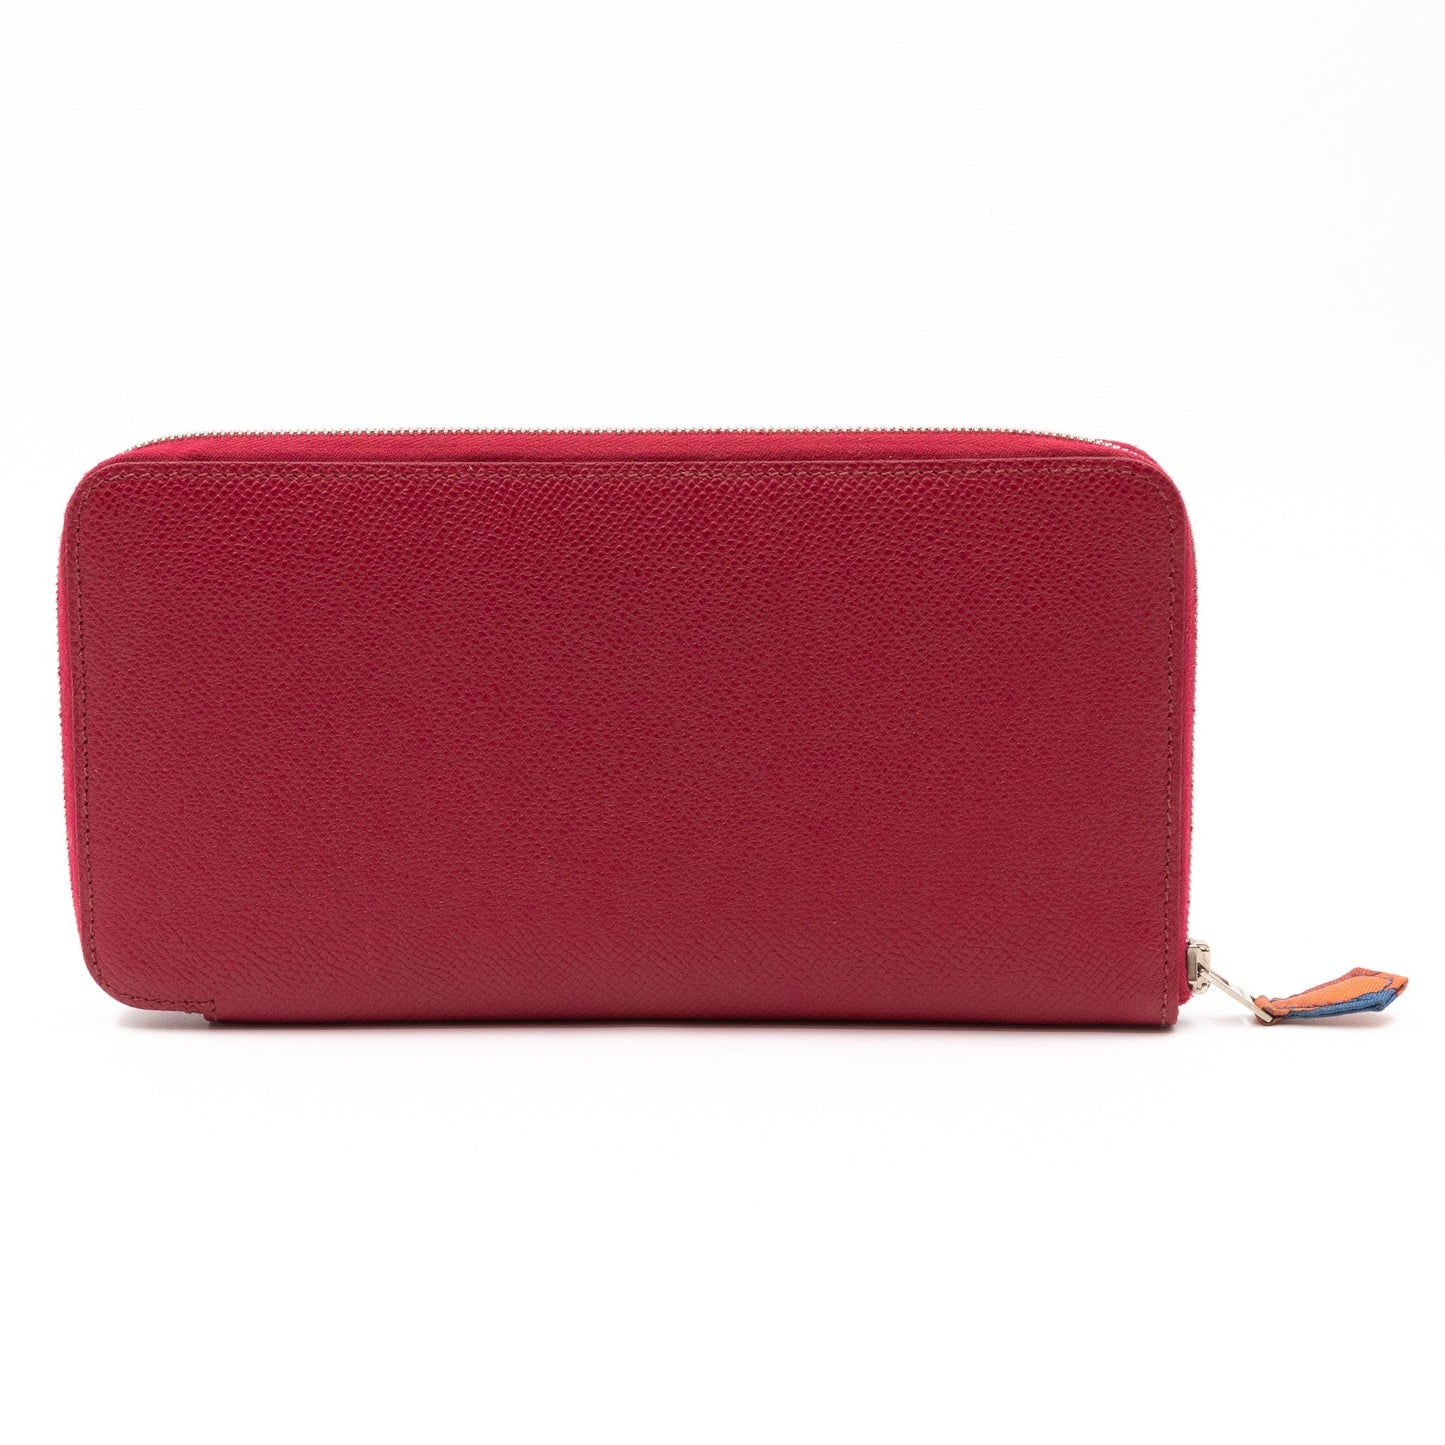 Silk'in Classic Wallet Rubis Leather